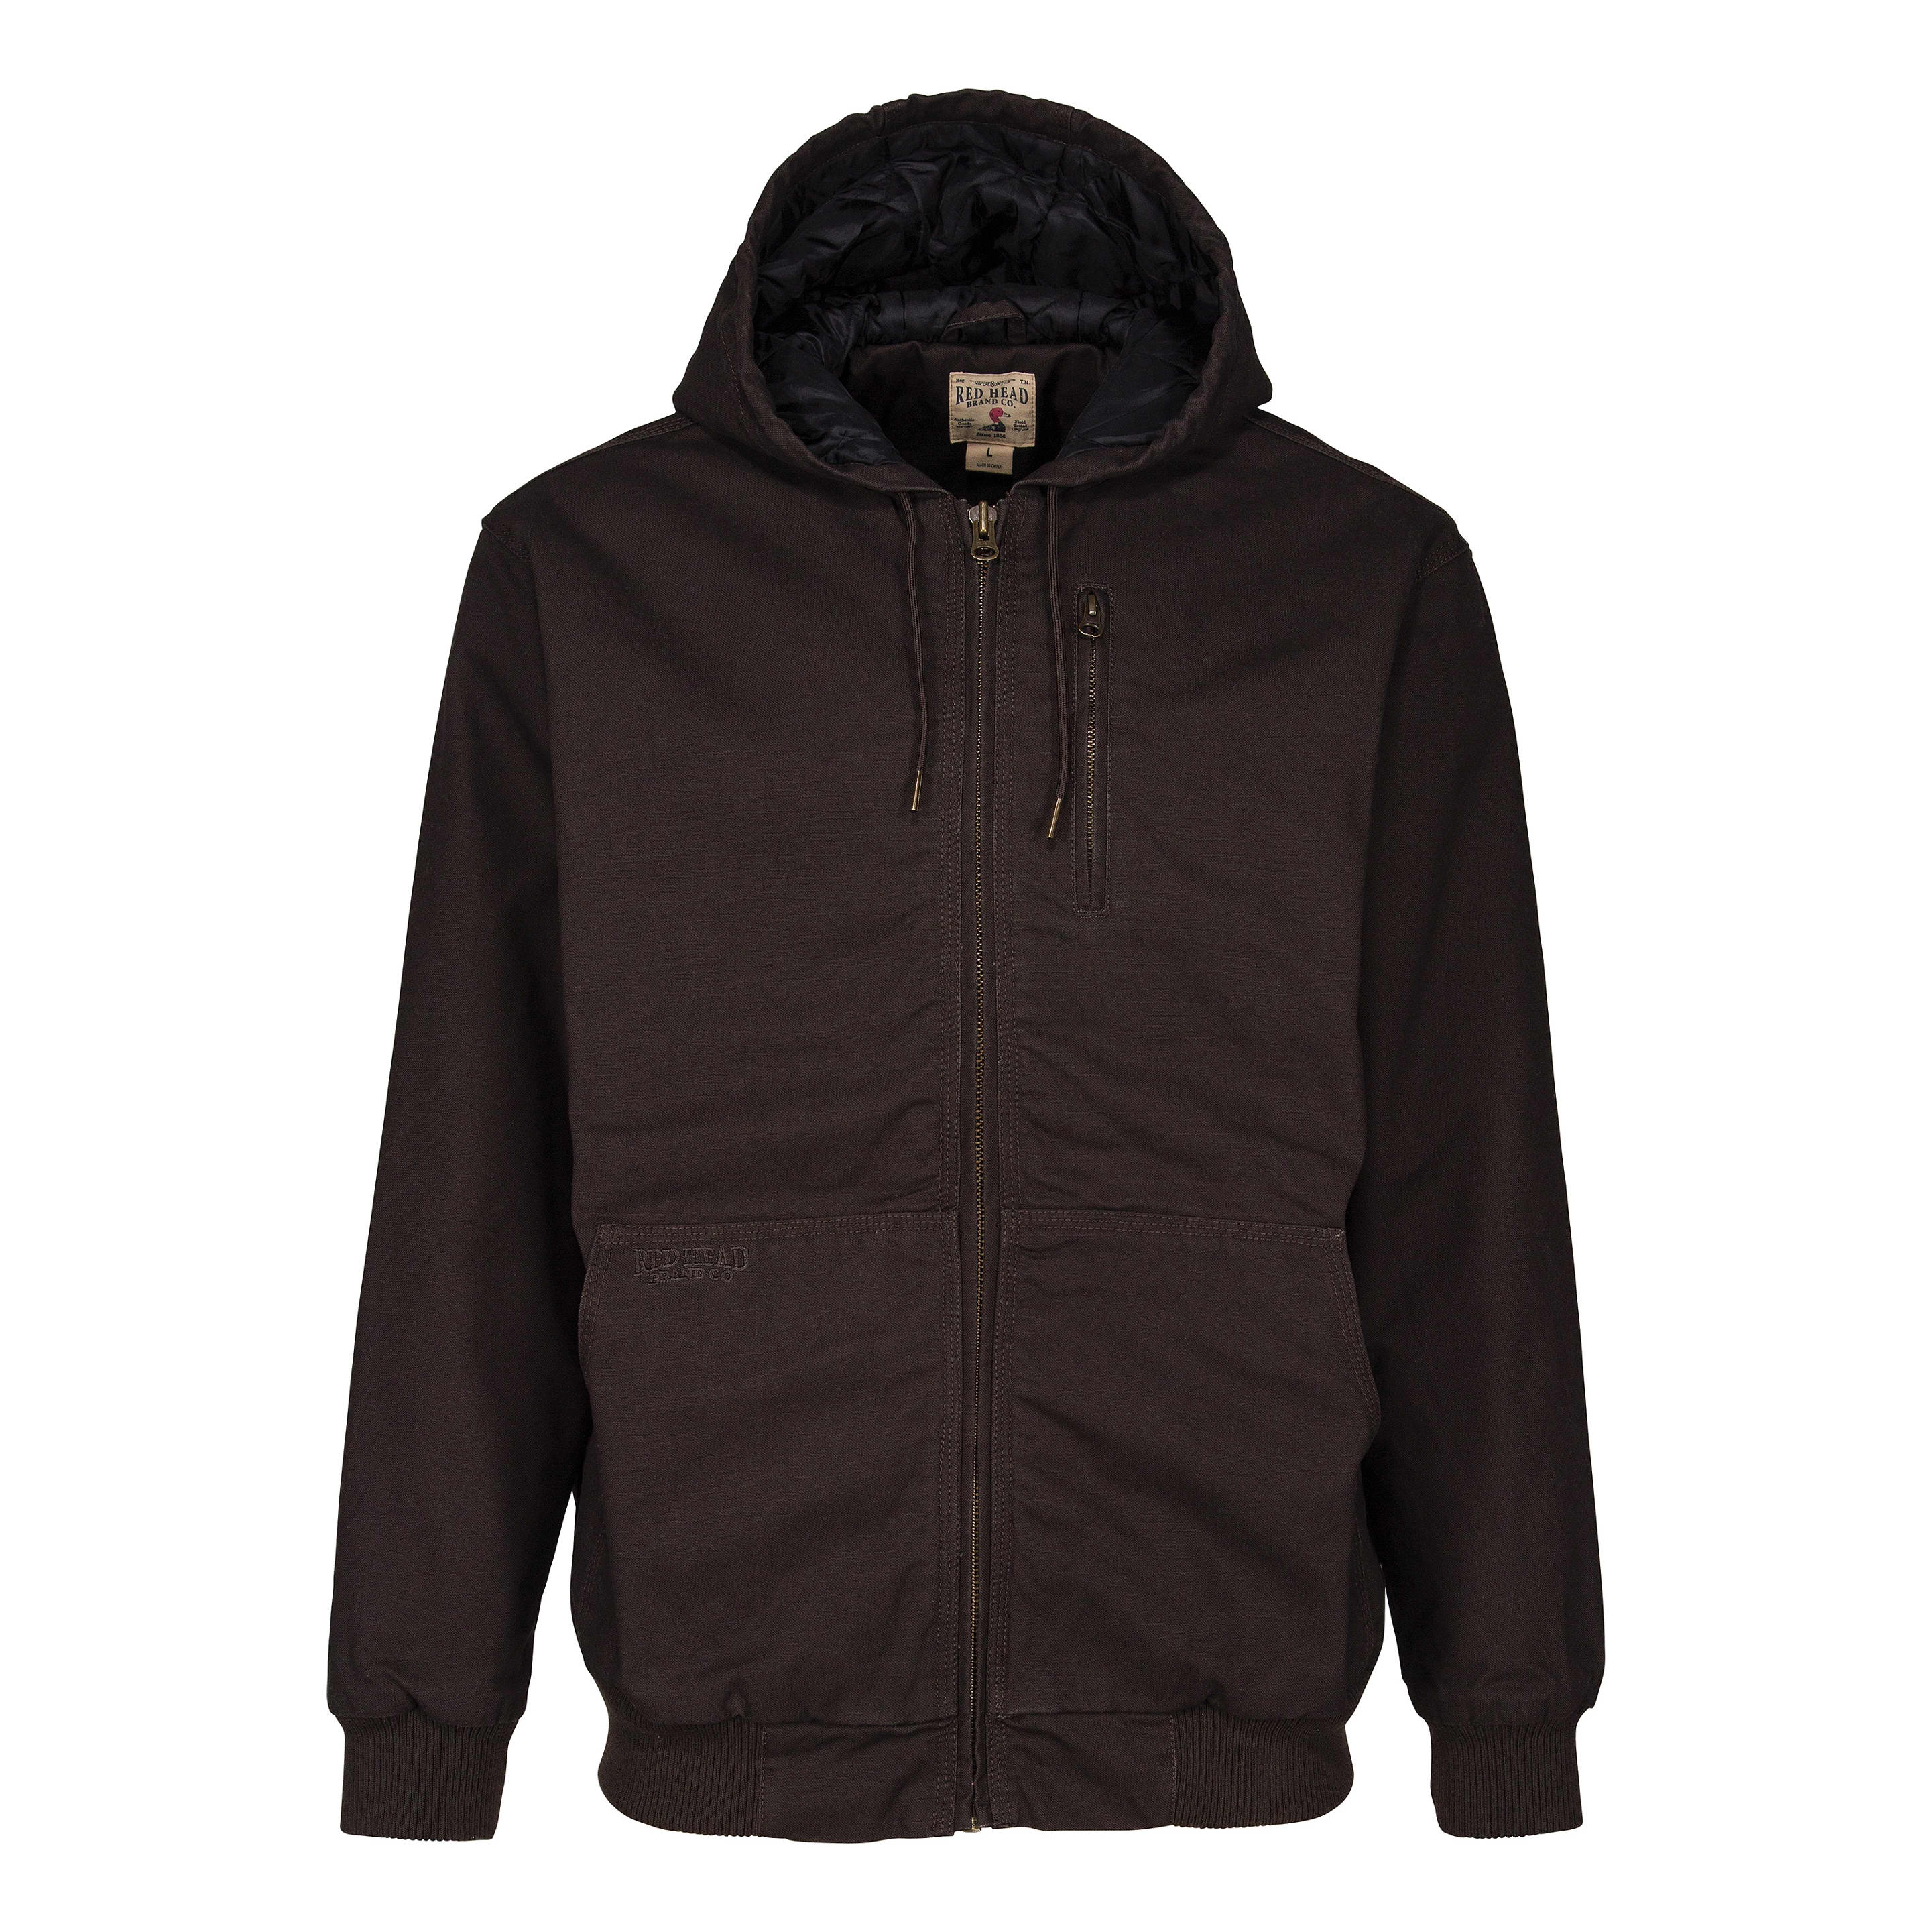 Redhead Sherpa-Lined Full-Zip Jacket for Men - Brown - XL